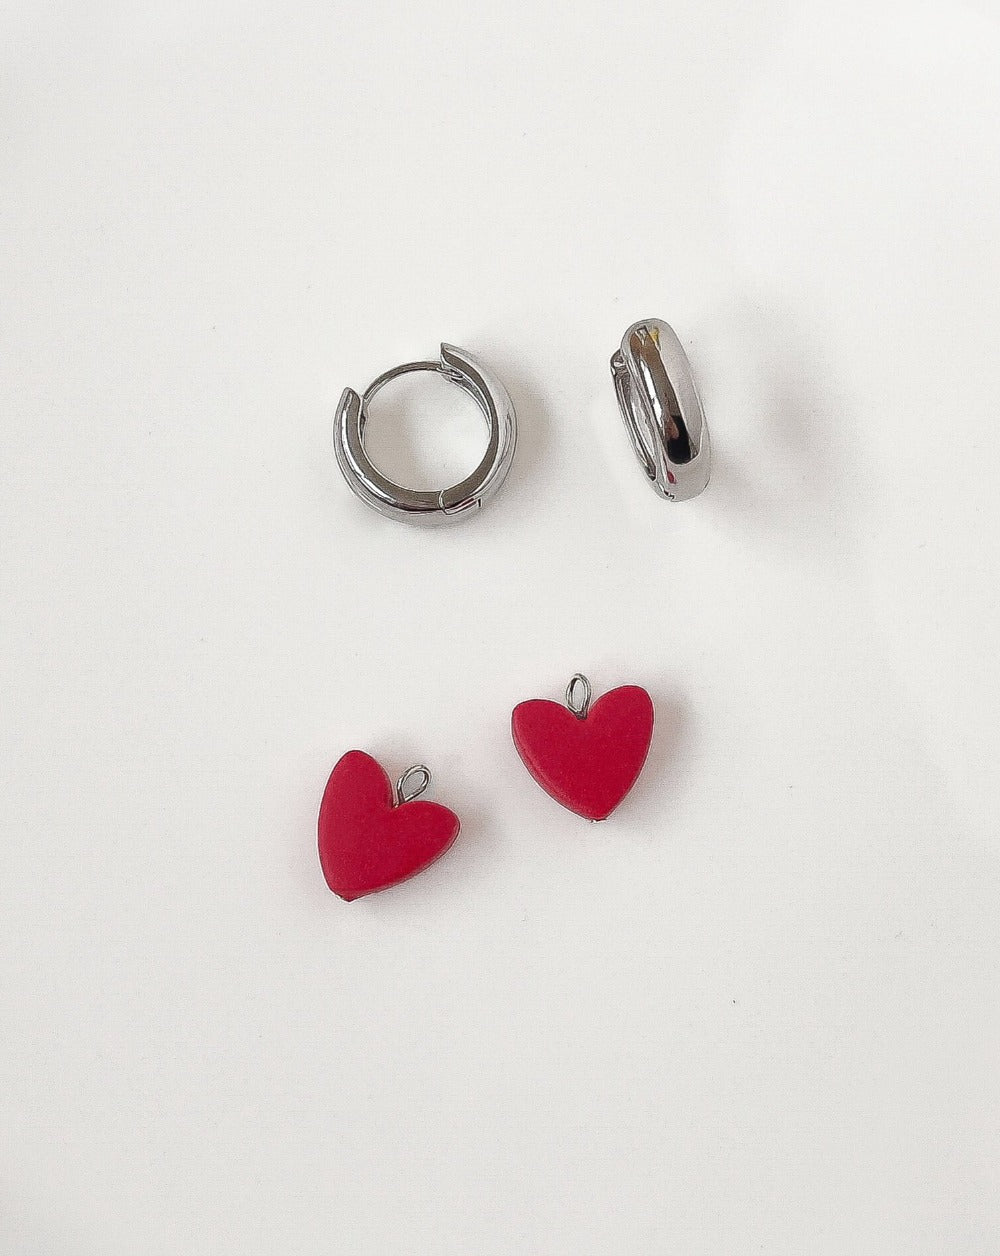 Close up of Charming Heart earrings with silver Hoops and Red Heart charm.